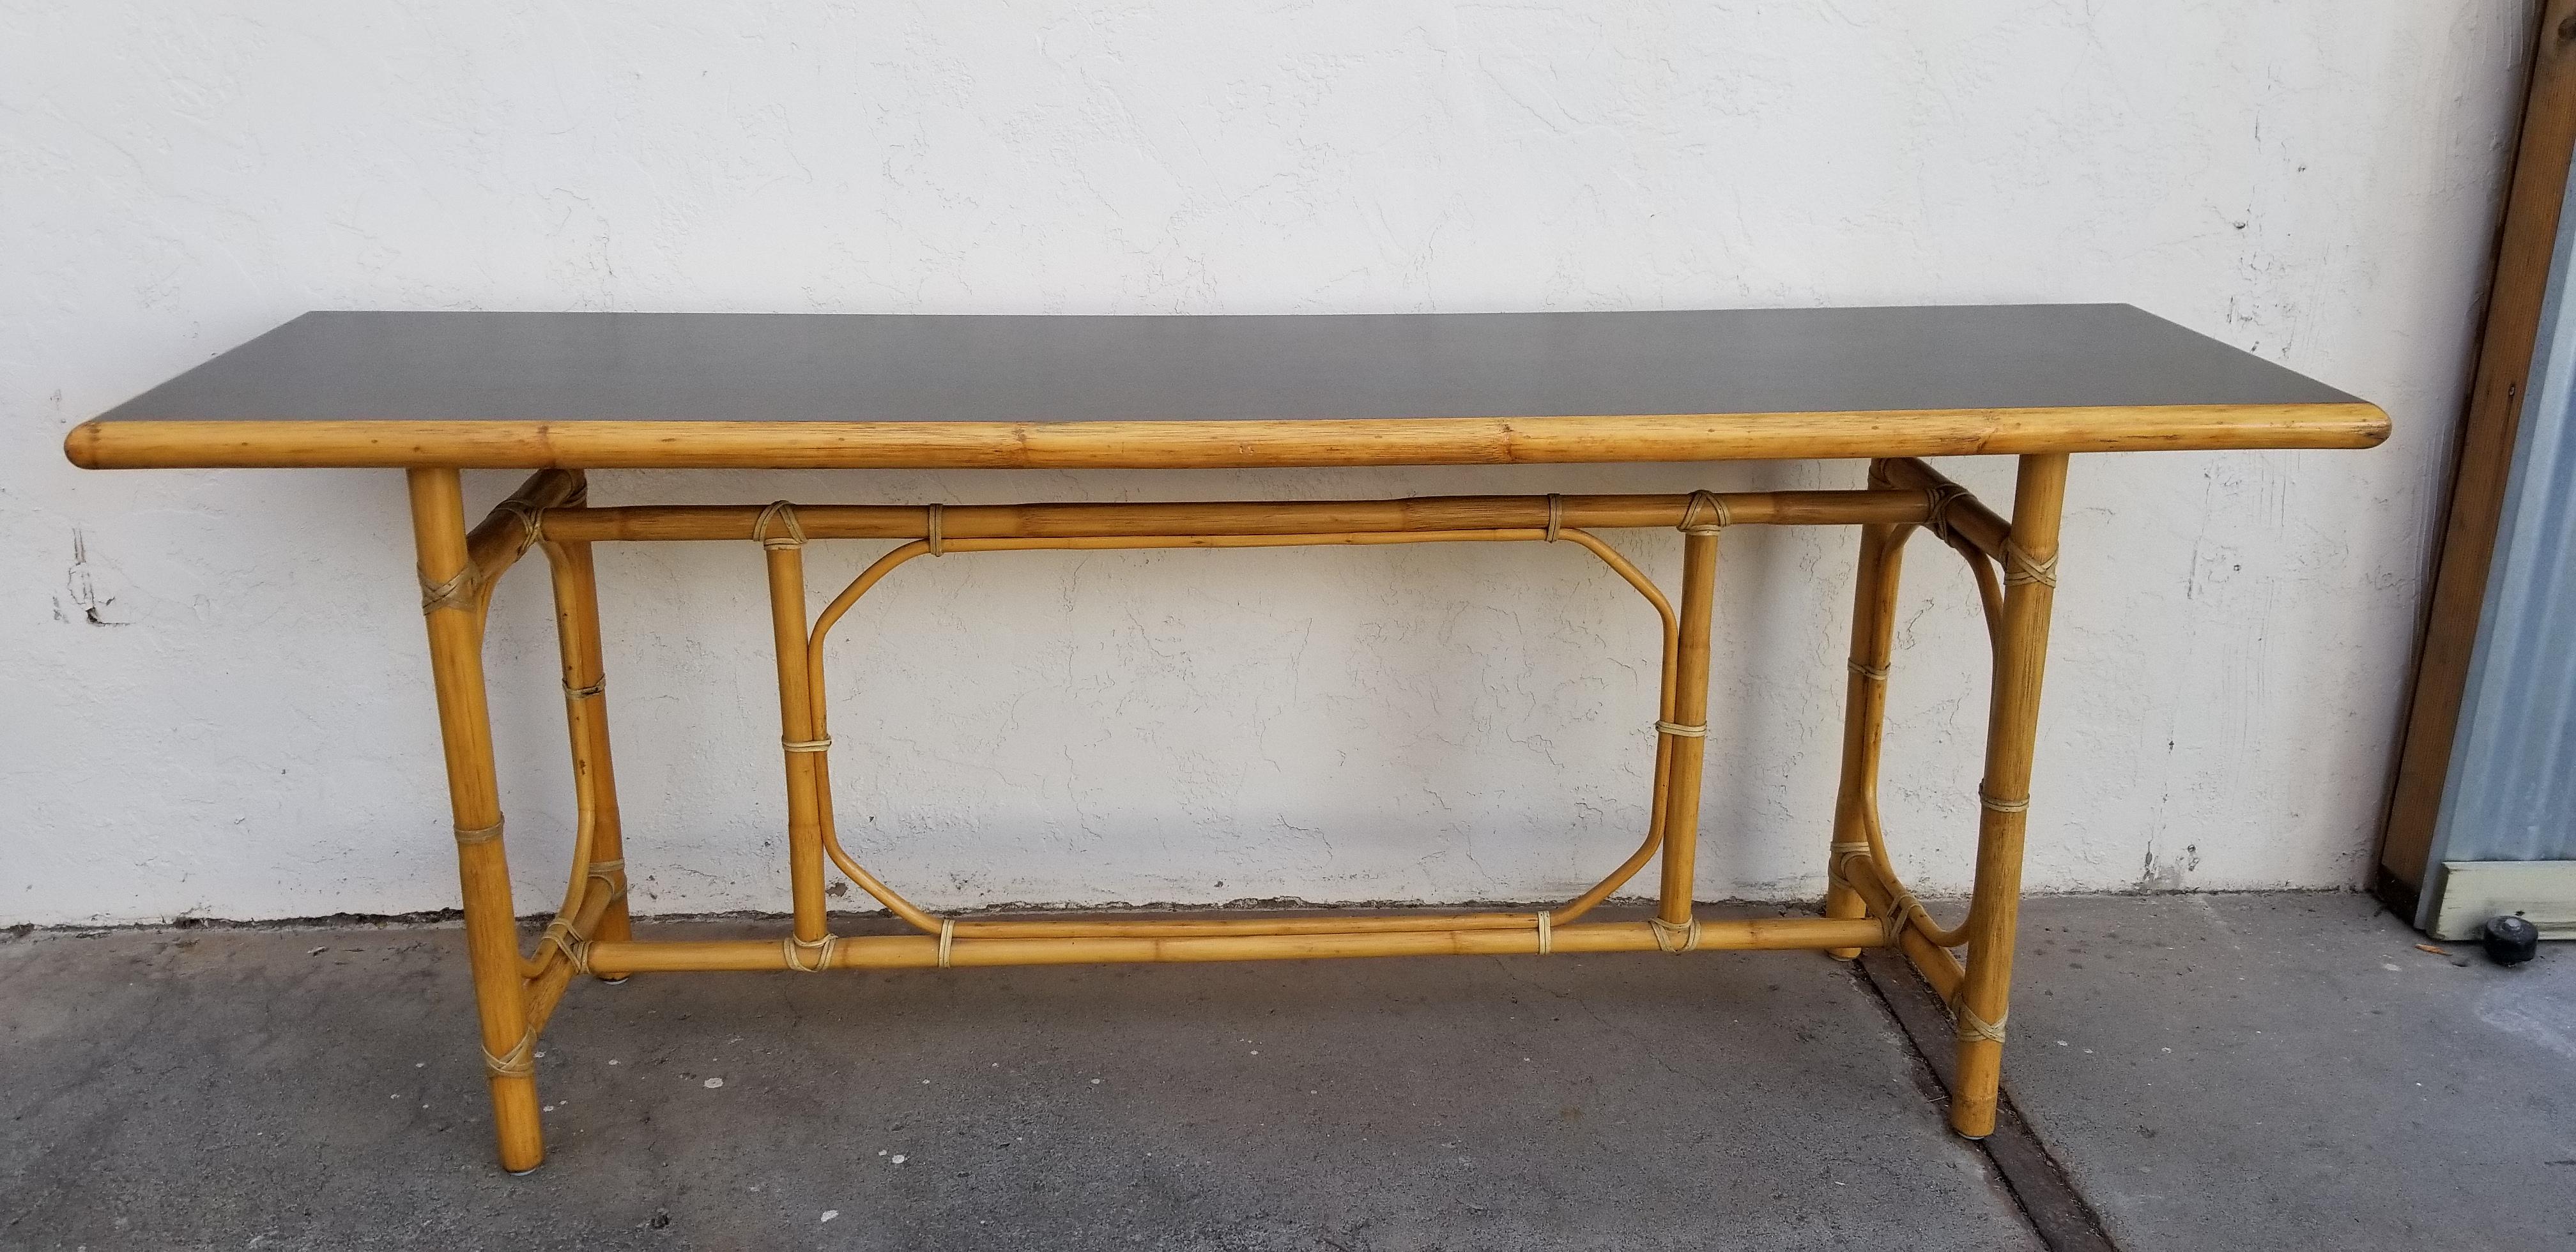 Finely crafted console or sofa table by John McGuire of San Francisco, California. Dark green leather inset top with bamboo frame and leather bindings. Very good original vintage condition retaining brass McGuire label. Patented joinery creates a